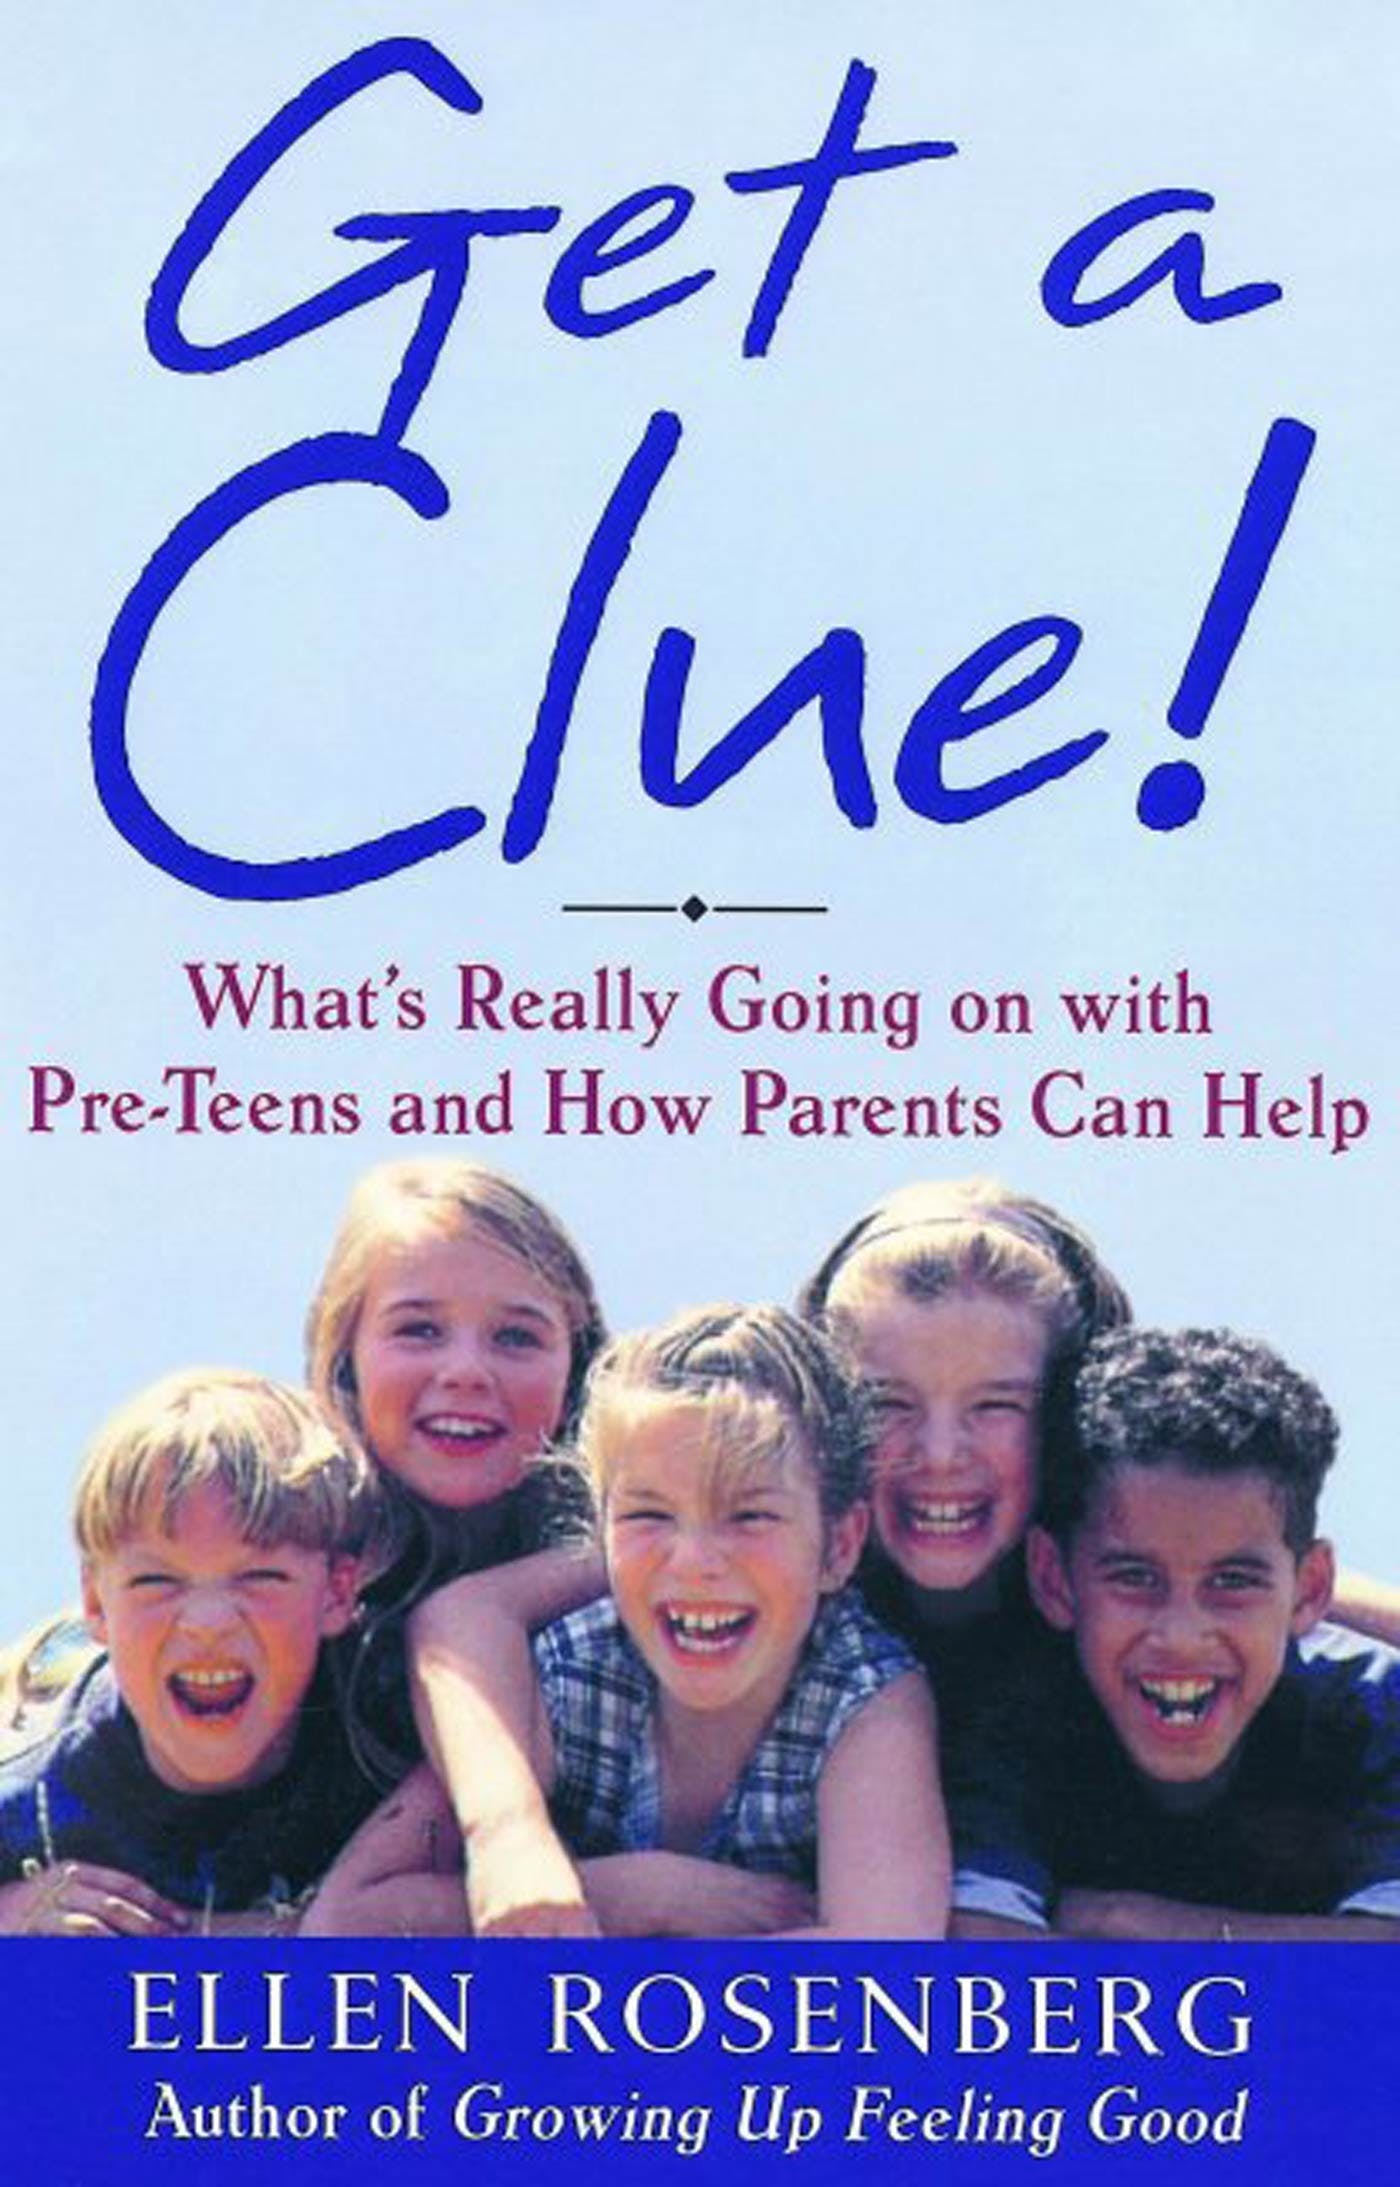 Get a Clue!: A Parents' Guide to Understanding and Communicating With Your Preteen